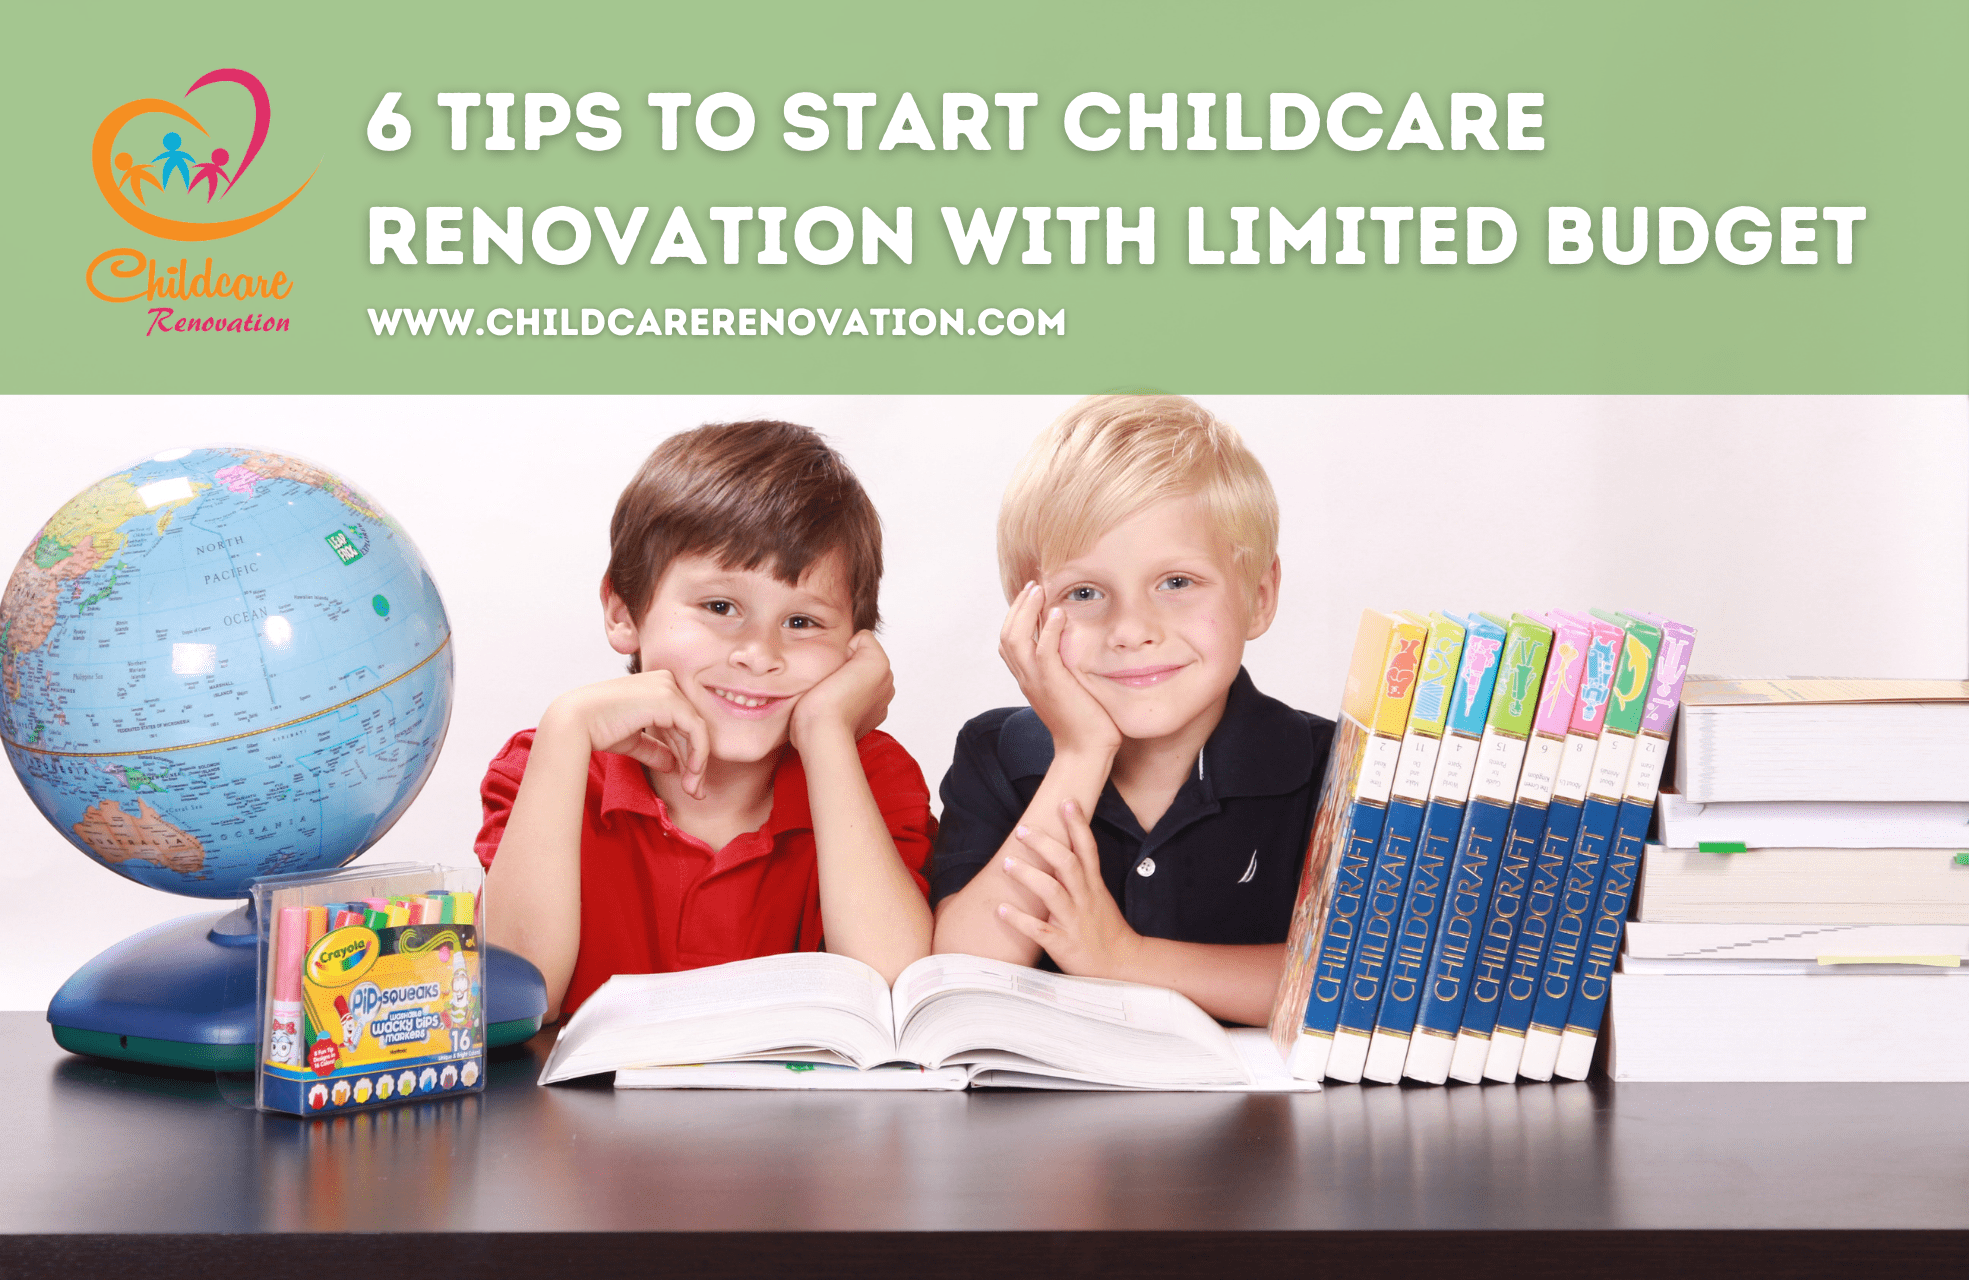 Childcare renovation with limited budget